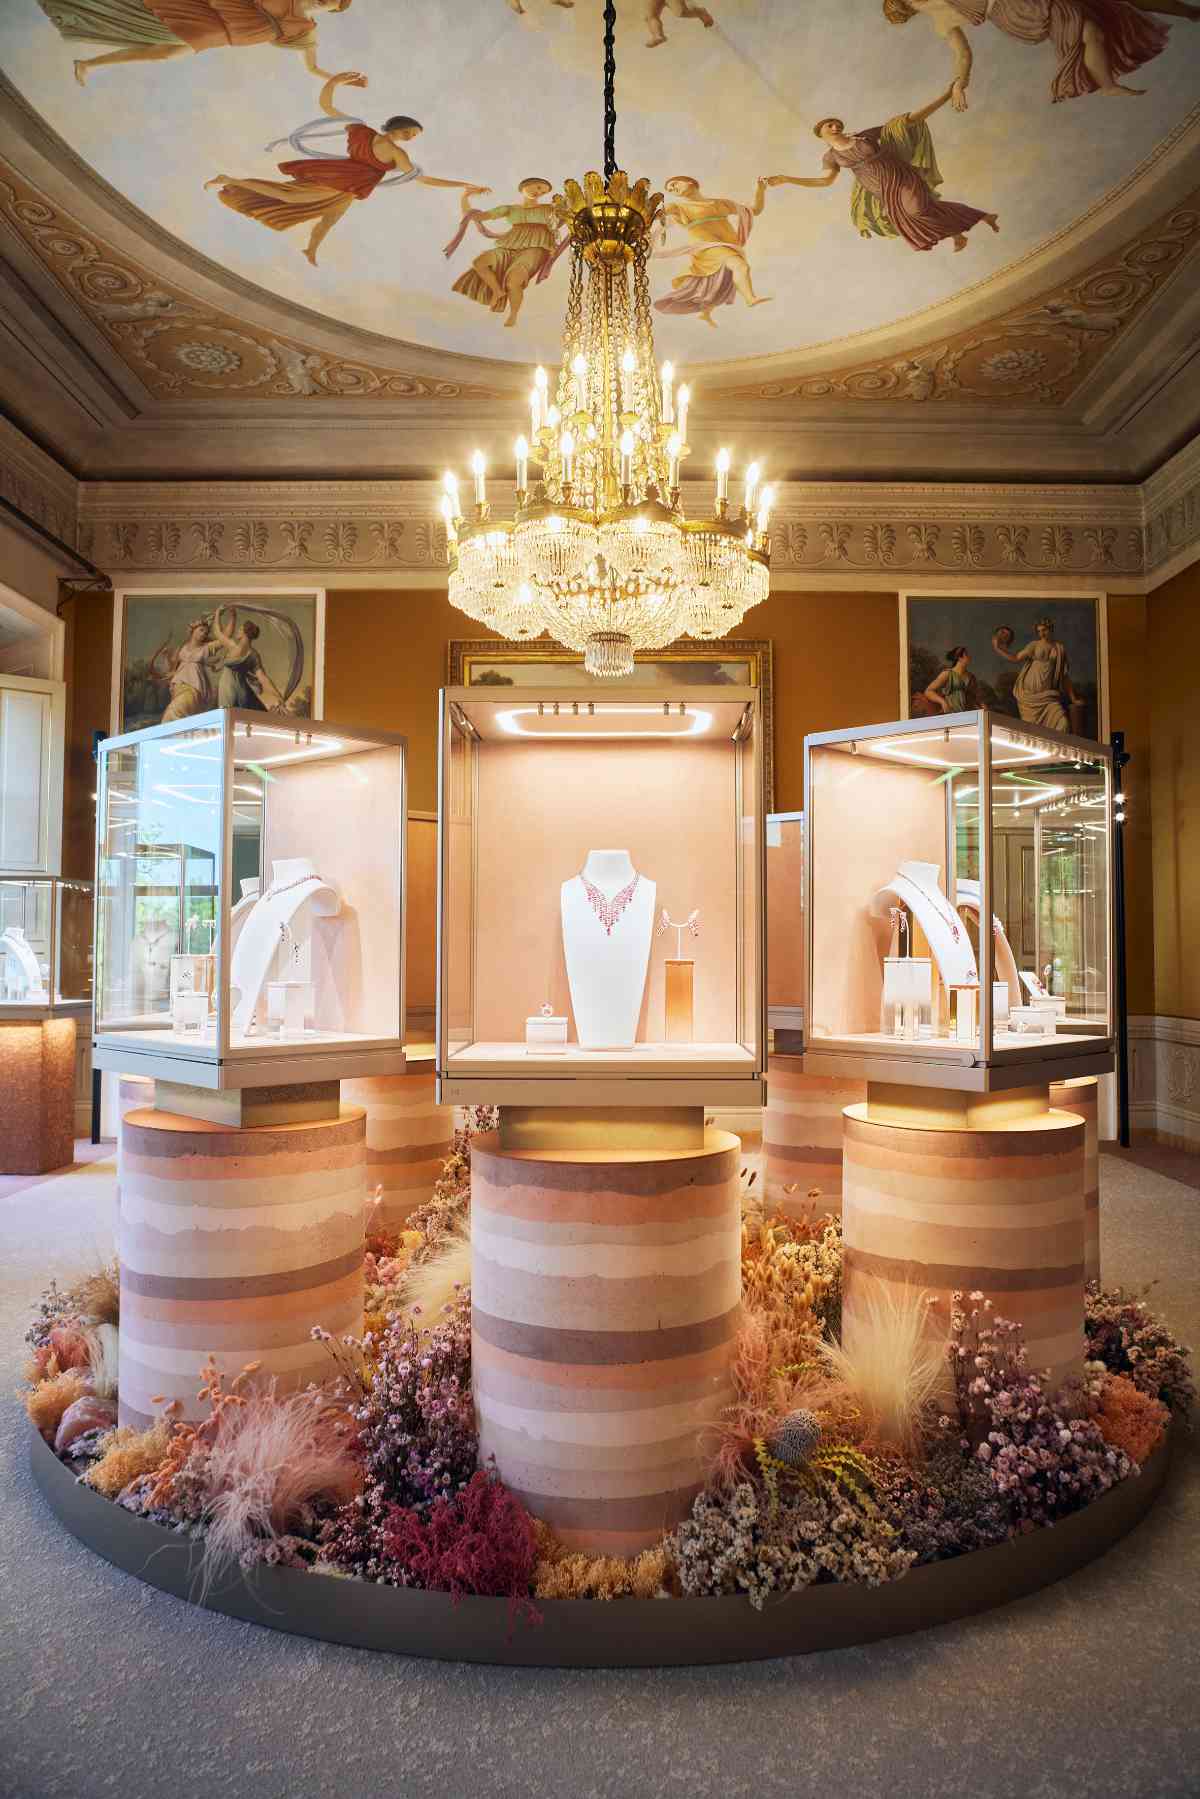 Cartier Store Decoration-3  Jewelry store interior, Store interior,  Jewelry store design